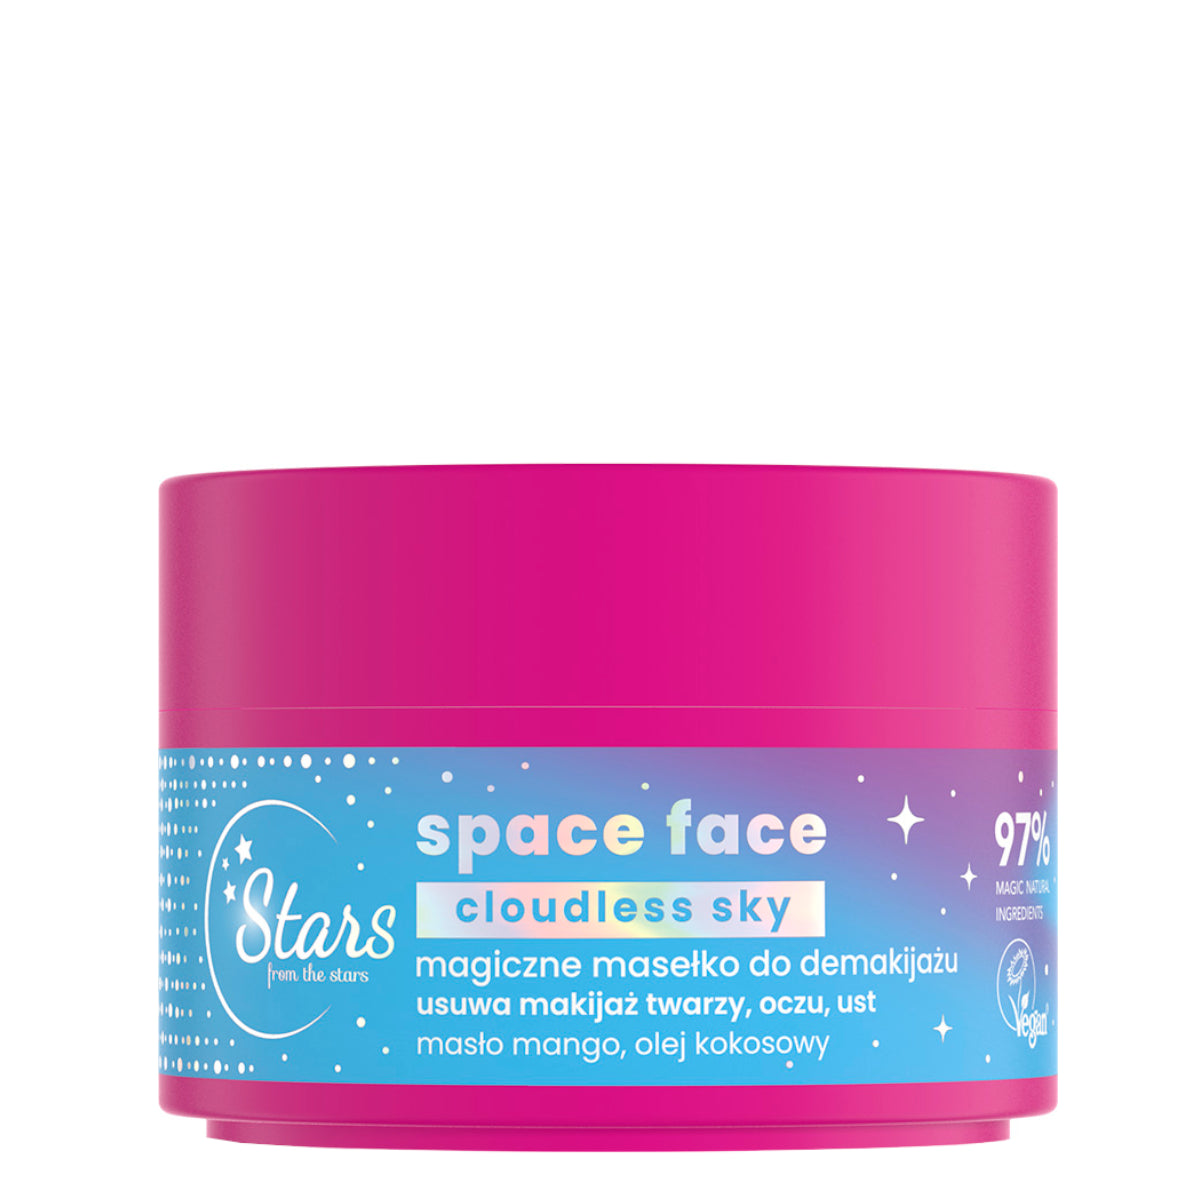 Stars Space Face Cloudless Sky Magic Makeup Remover Butter